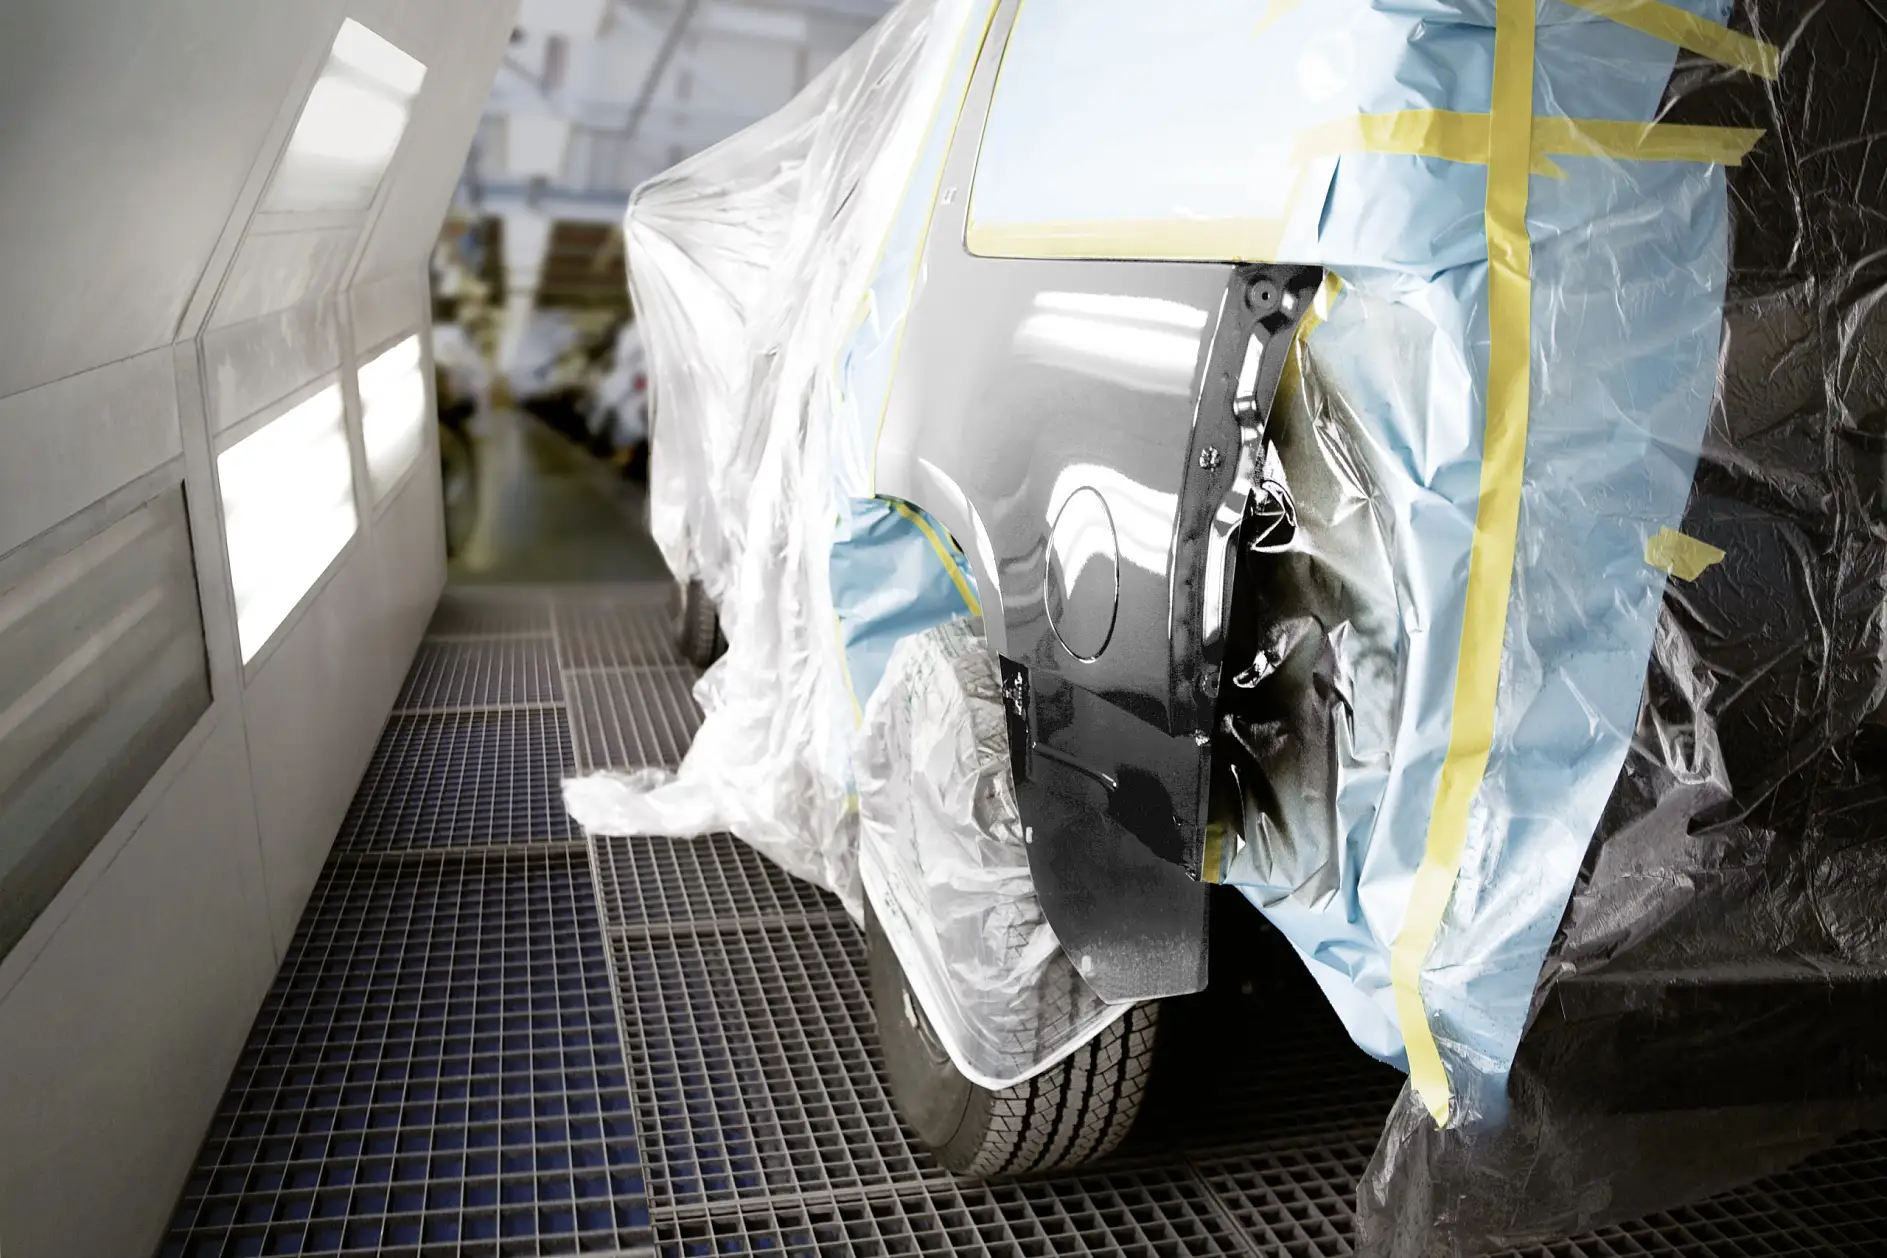 Our masking range and expertise helps car manufacturers to master the challenges and keep each step as lean as possible. This includes ensuring reliable adhesion; avoiding overspray on e-solvent and water-based coatings even at high temperatures in the oven; and guaranteeing simple and residue-free tape removal to prevent extra work